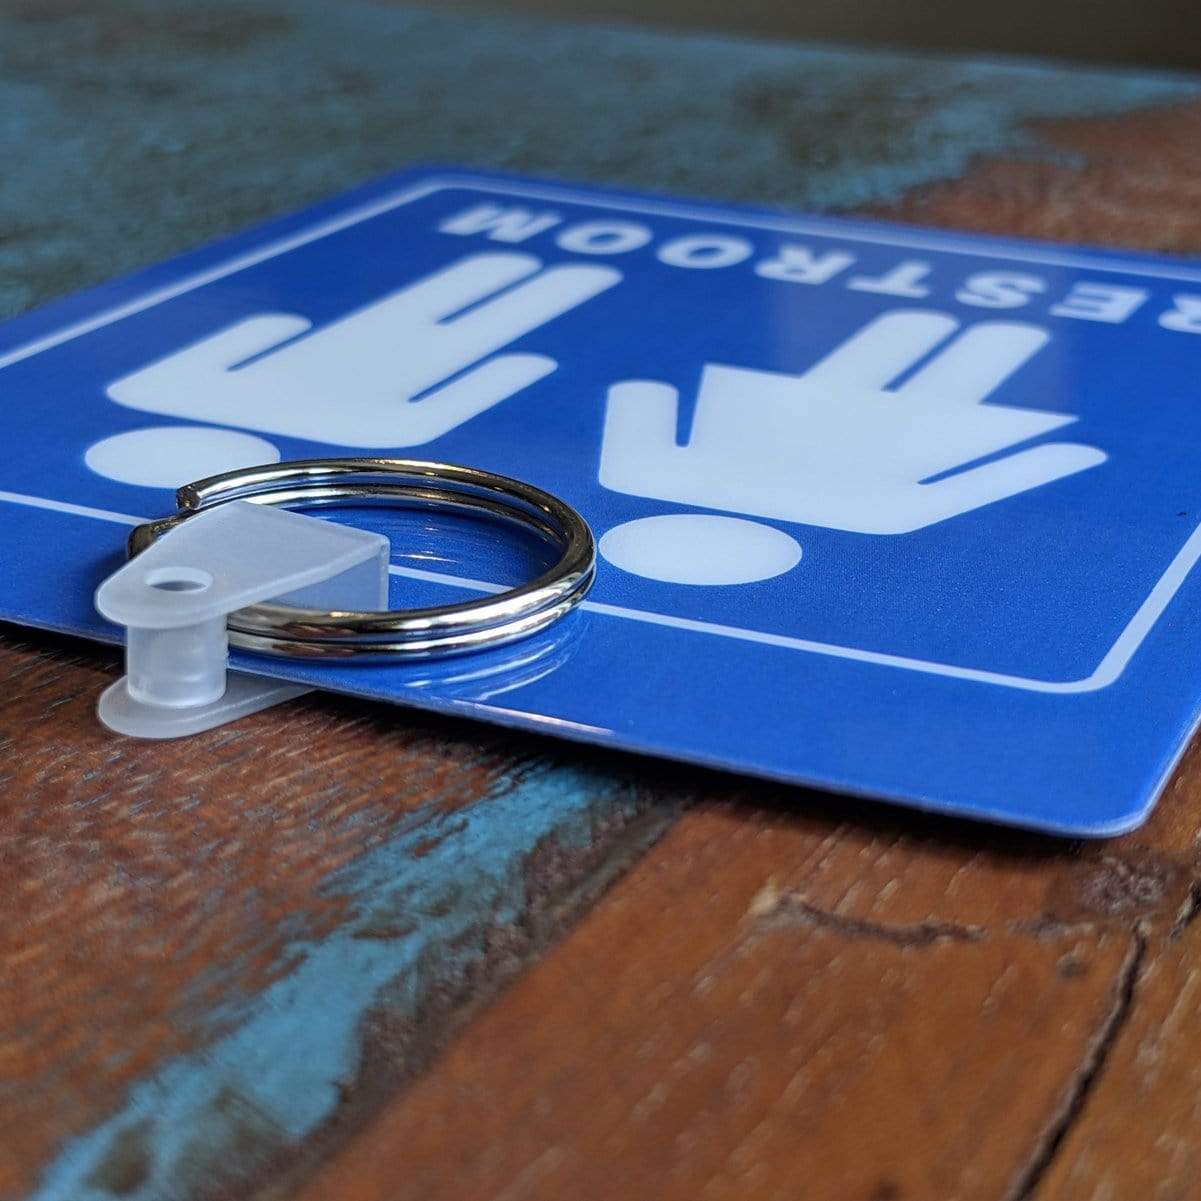 Close-up of a blue Unisex Restroom Pass Keychain - Bathroom Tag with Key Chain Ring - Heavy Duty Large Passes for Unisex & Family Restrooms with Key Holder (Sold in 2 Pack) (SPID-9840-Blue) with male and female symbols attached to a durable key holder, laying flat on a wooden surface.